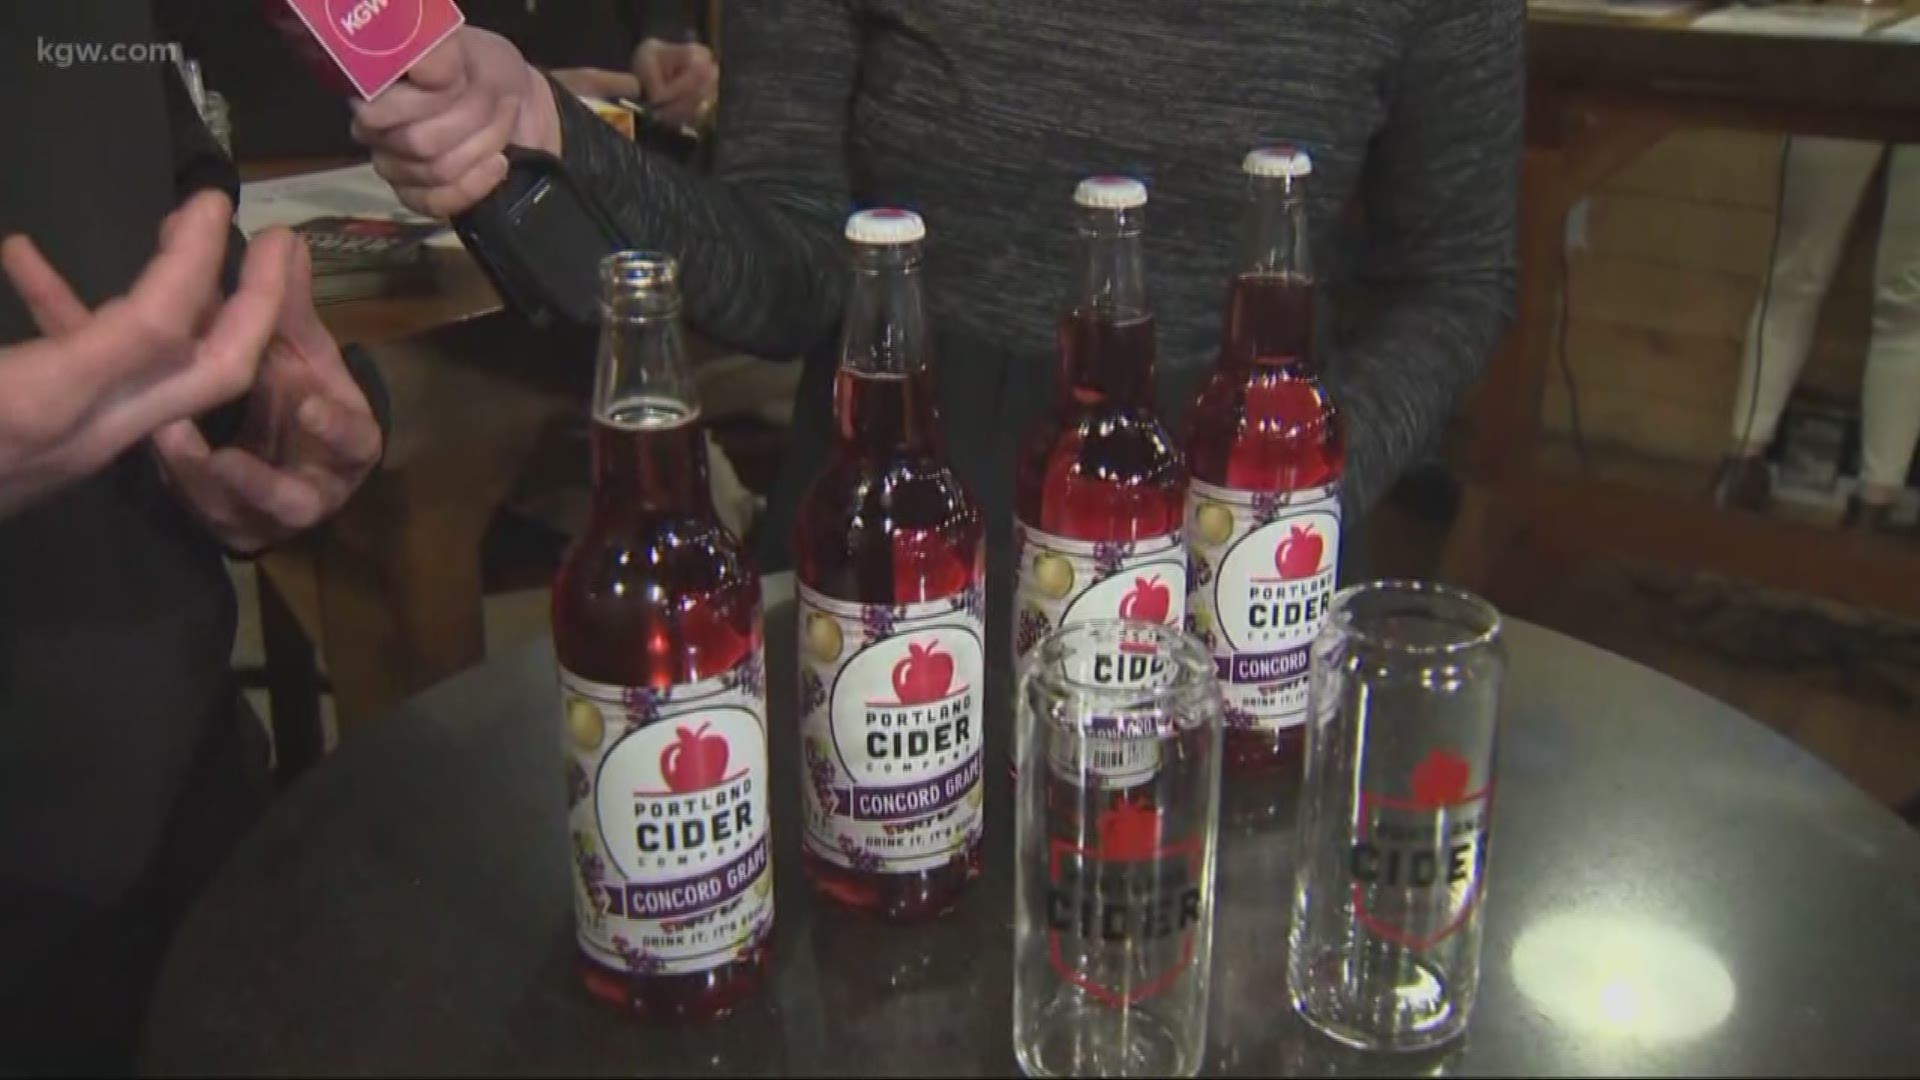 Portland Cider Co. is celebrating the release of their seasonal grape cider with a 'Grape Gatsby' party. Wear a dapper or flapper costume and get a discount.
portlandcider.com
#TonightwithCassidy